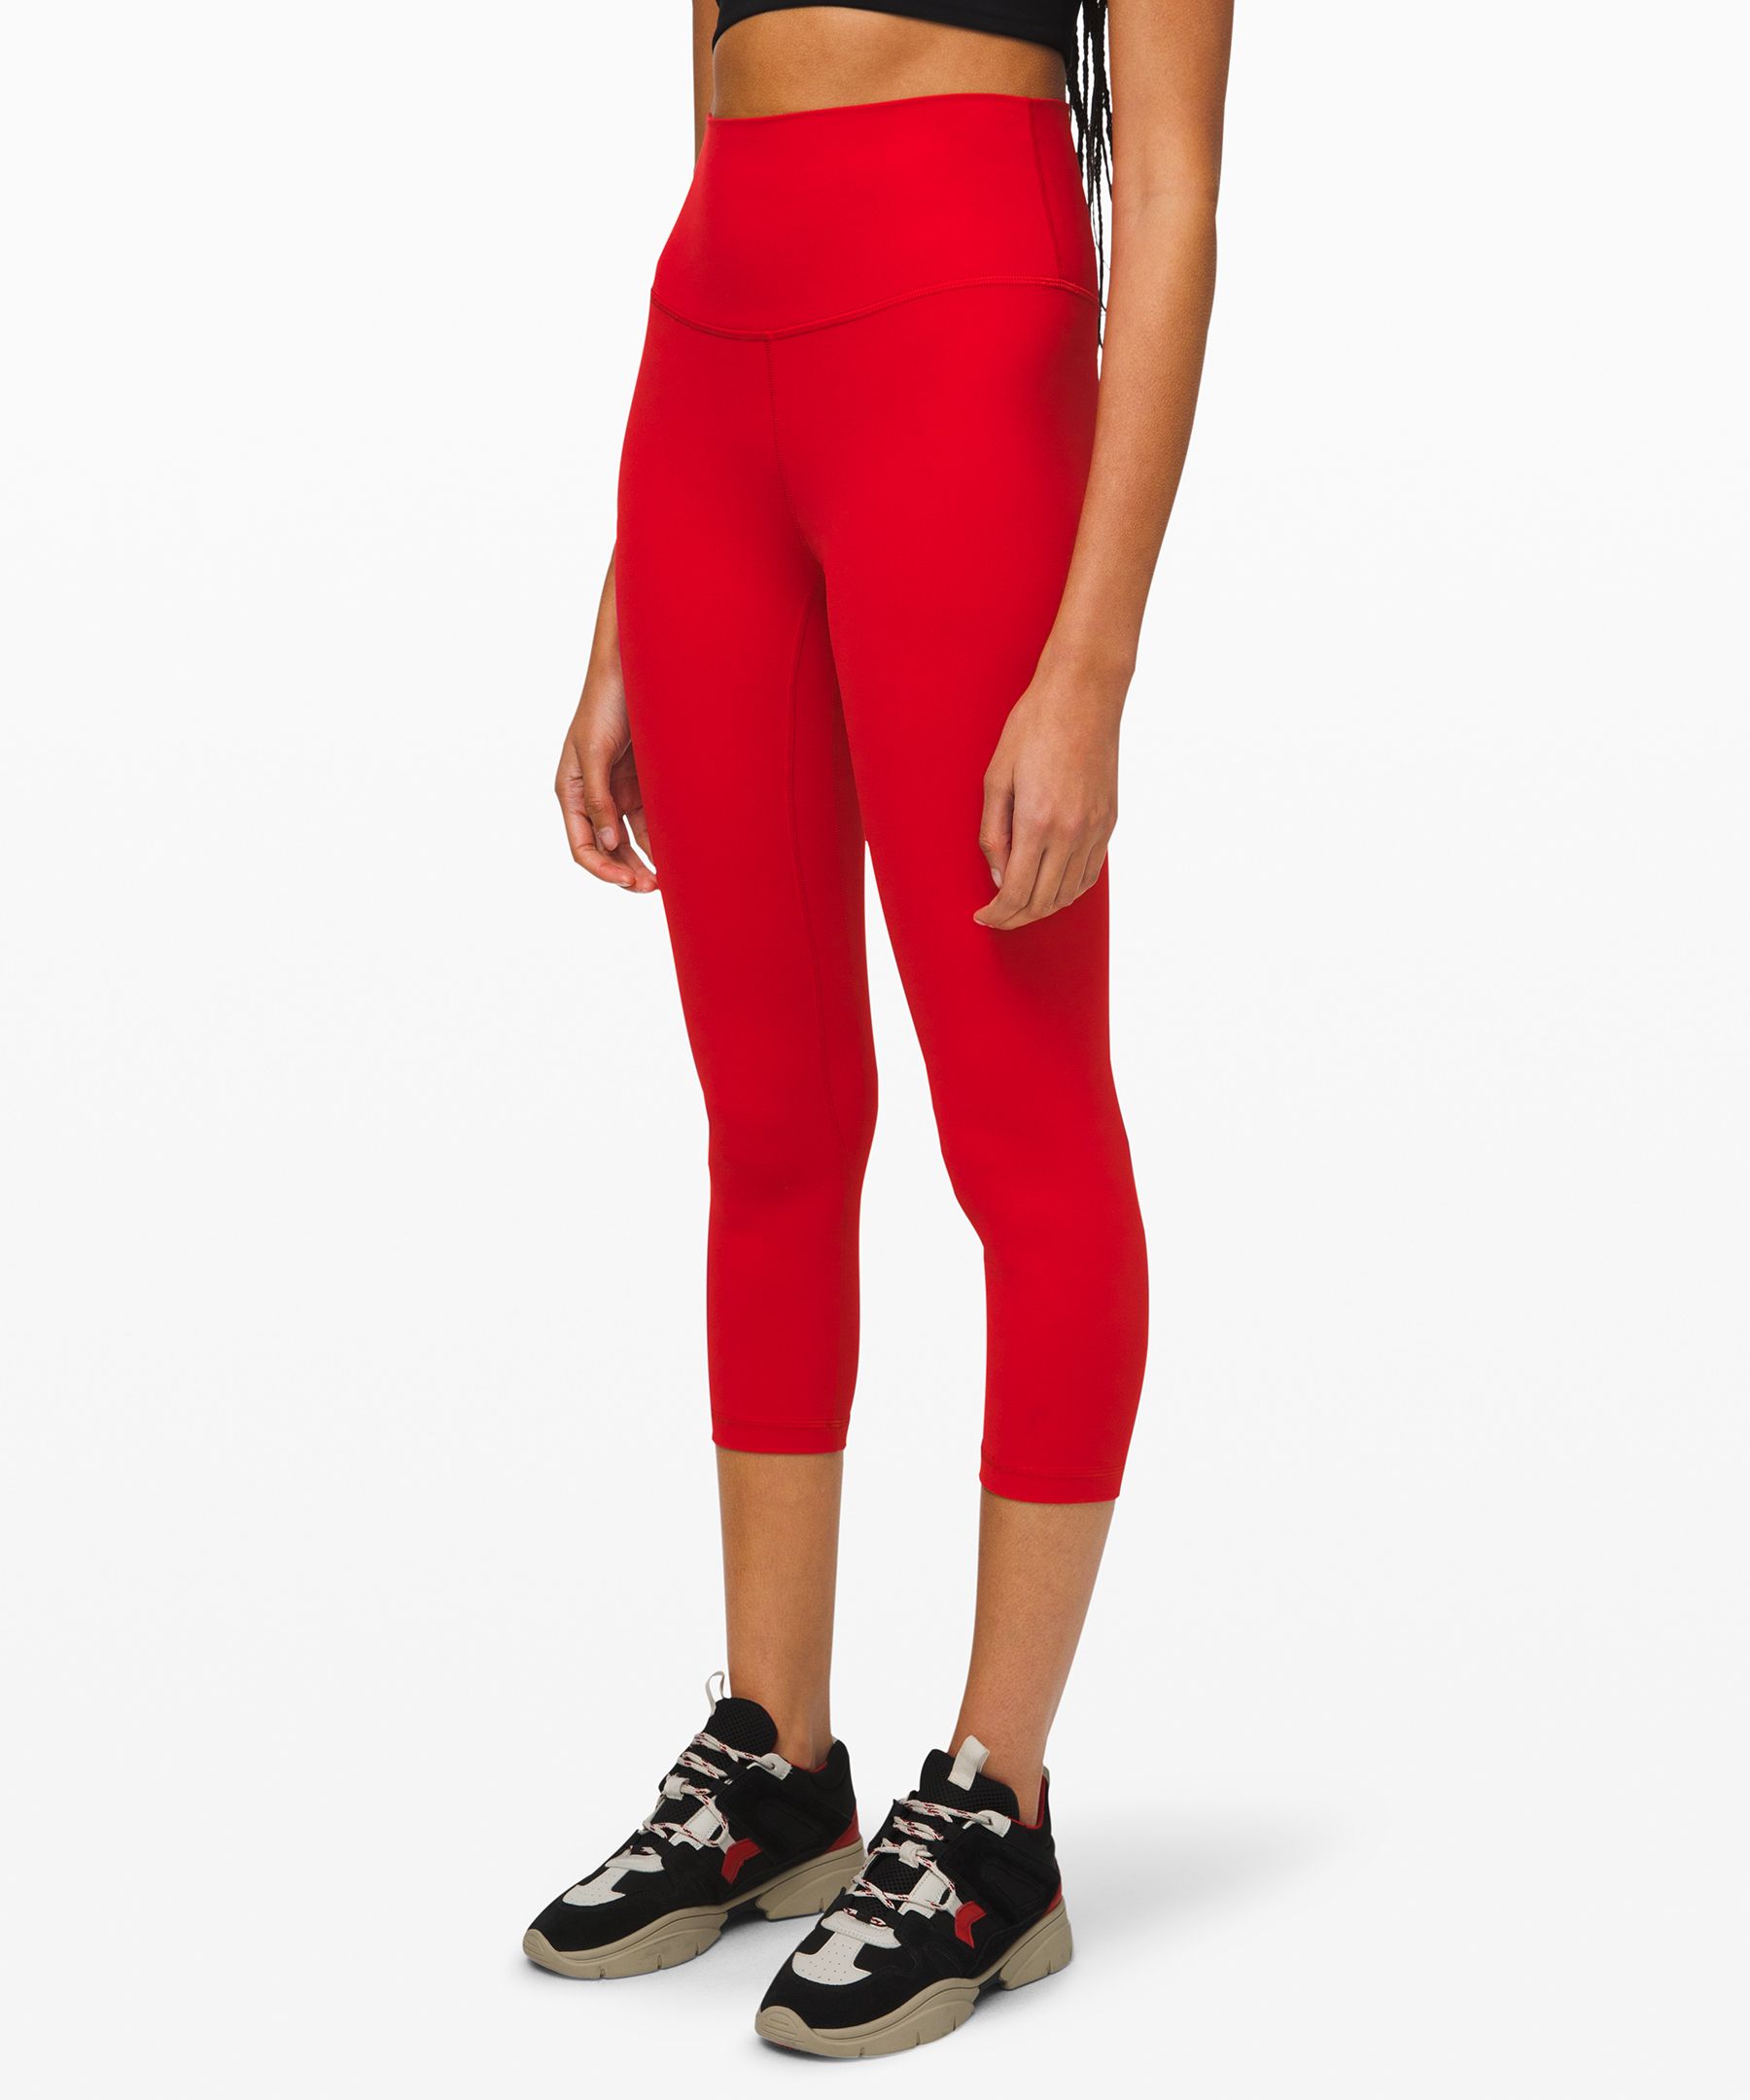 red yoga outfit